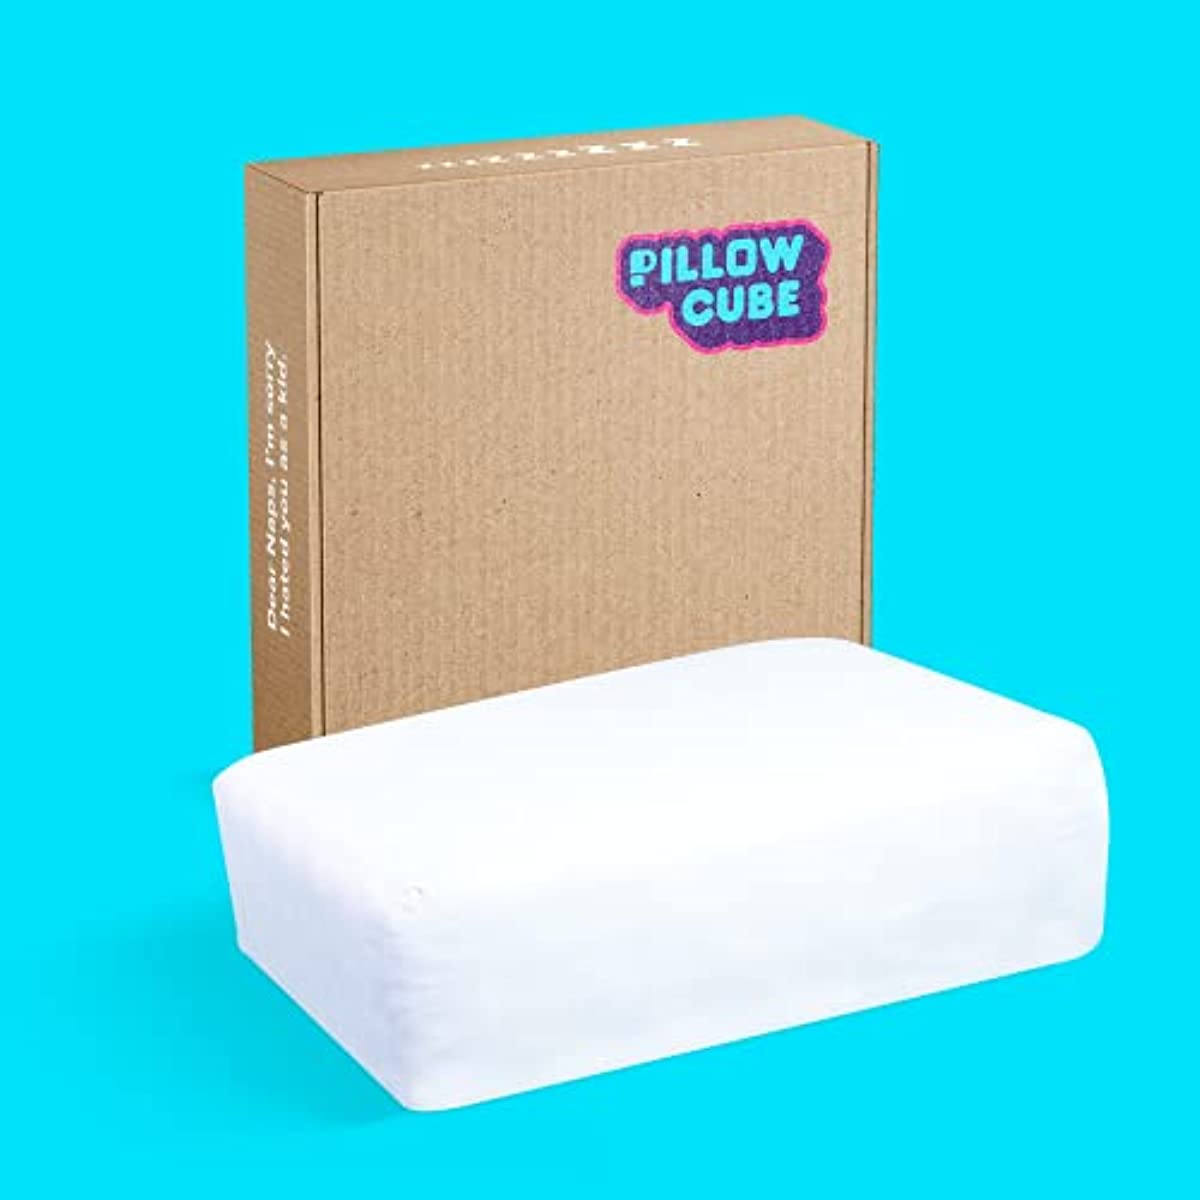 Pillow Cube Side Cube Pro - Thin (4”) - Bed Pillows for Sleeping on Your Side, Cooling Memory Foam Pillows Support Head and Neck for Pain Relief - 12\"x24\"x4”